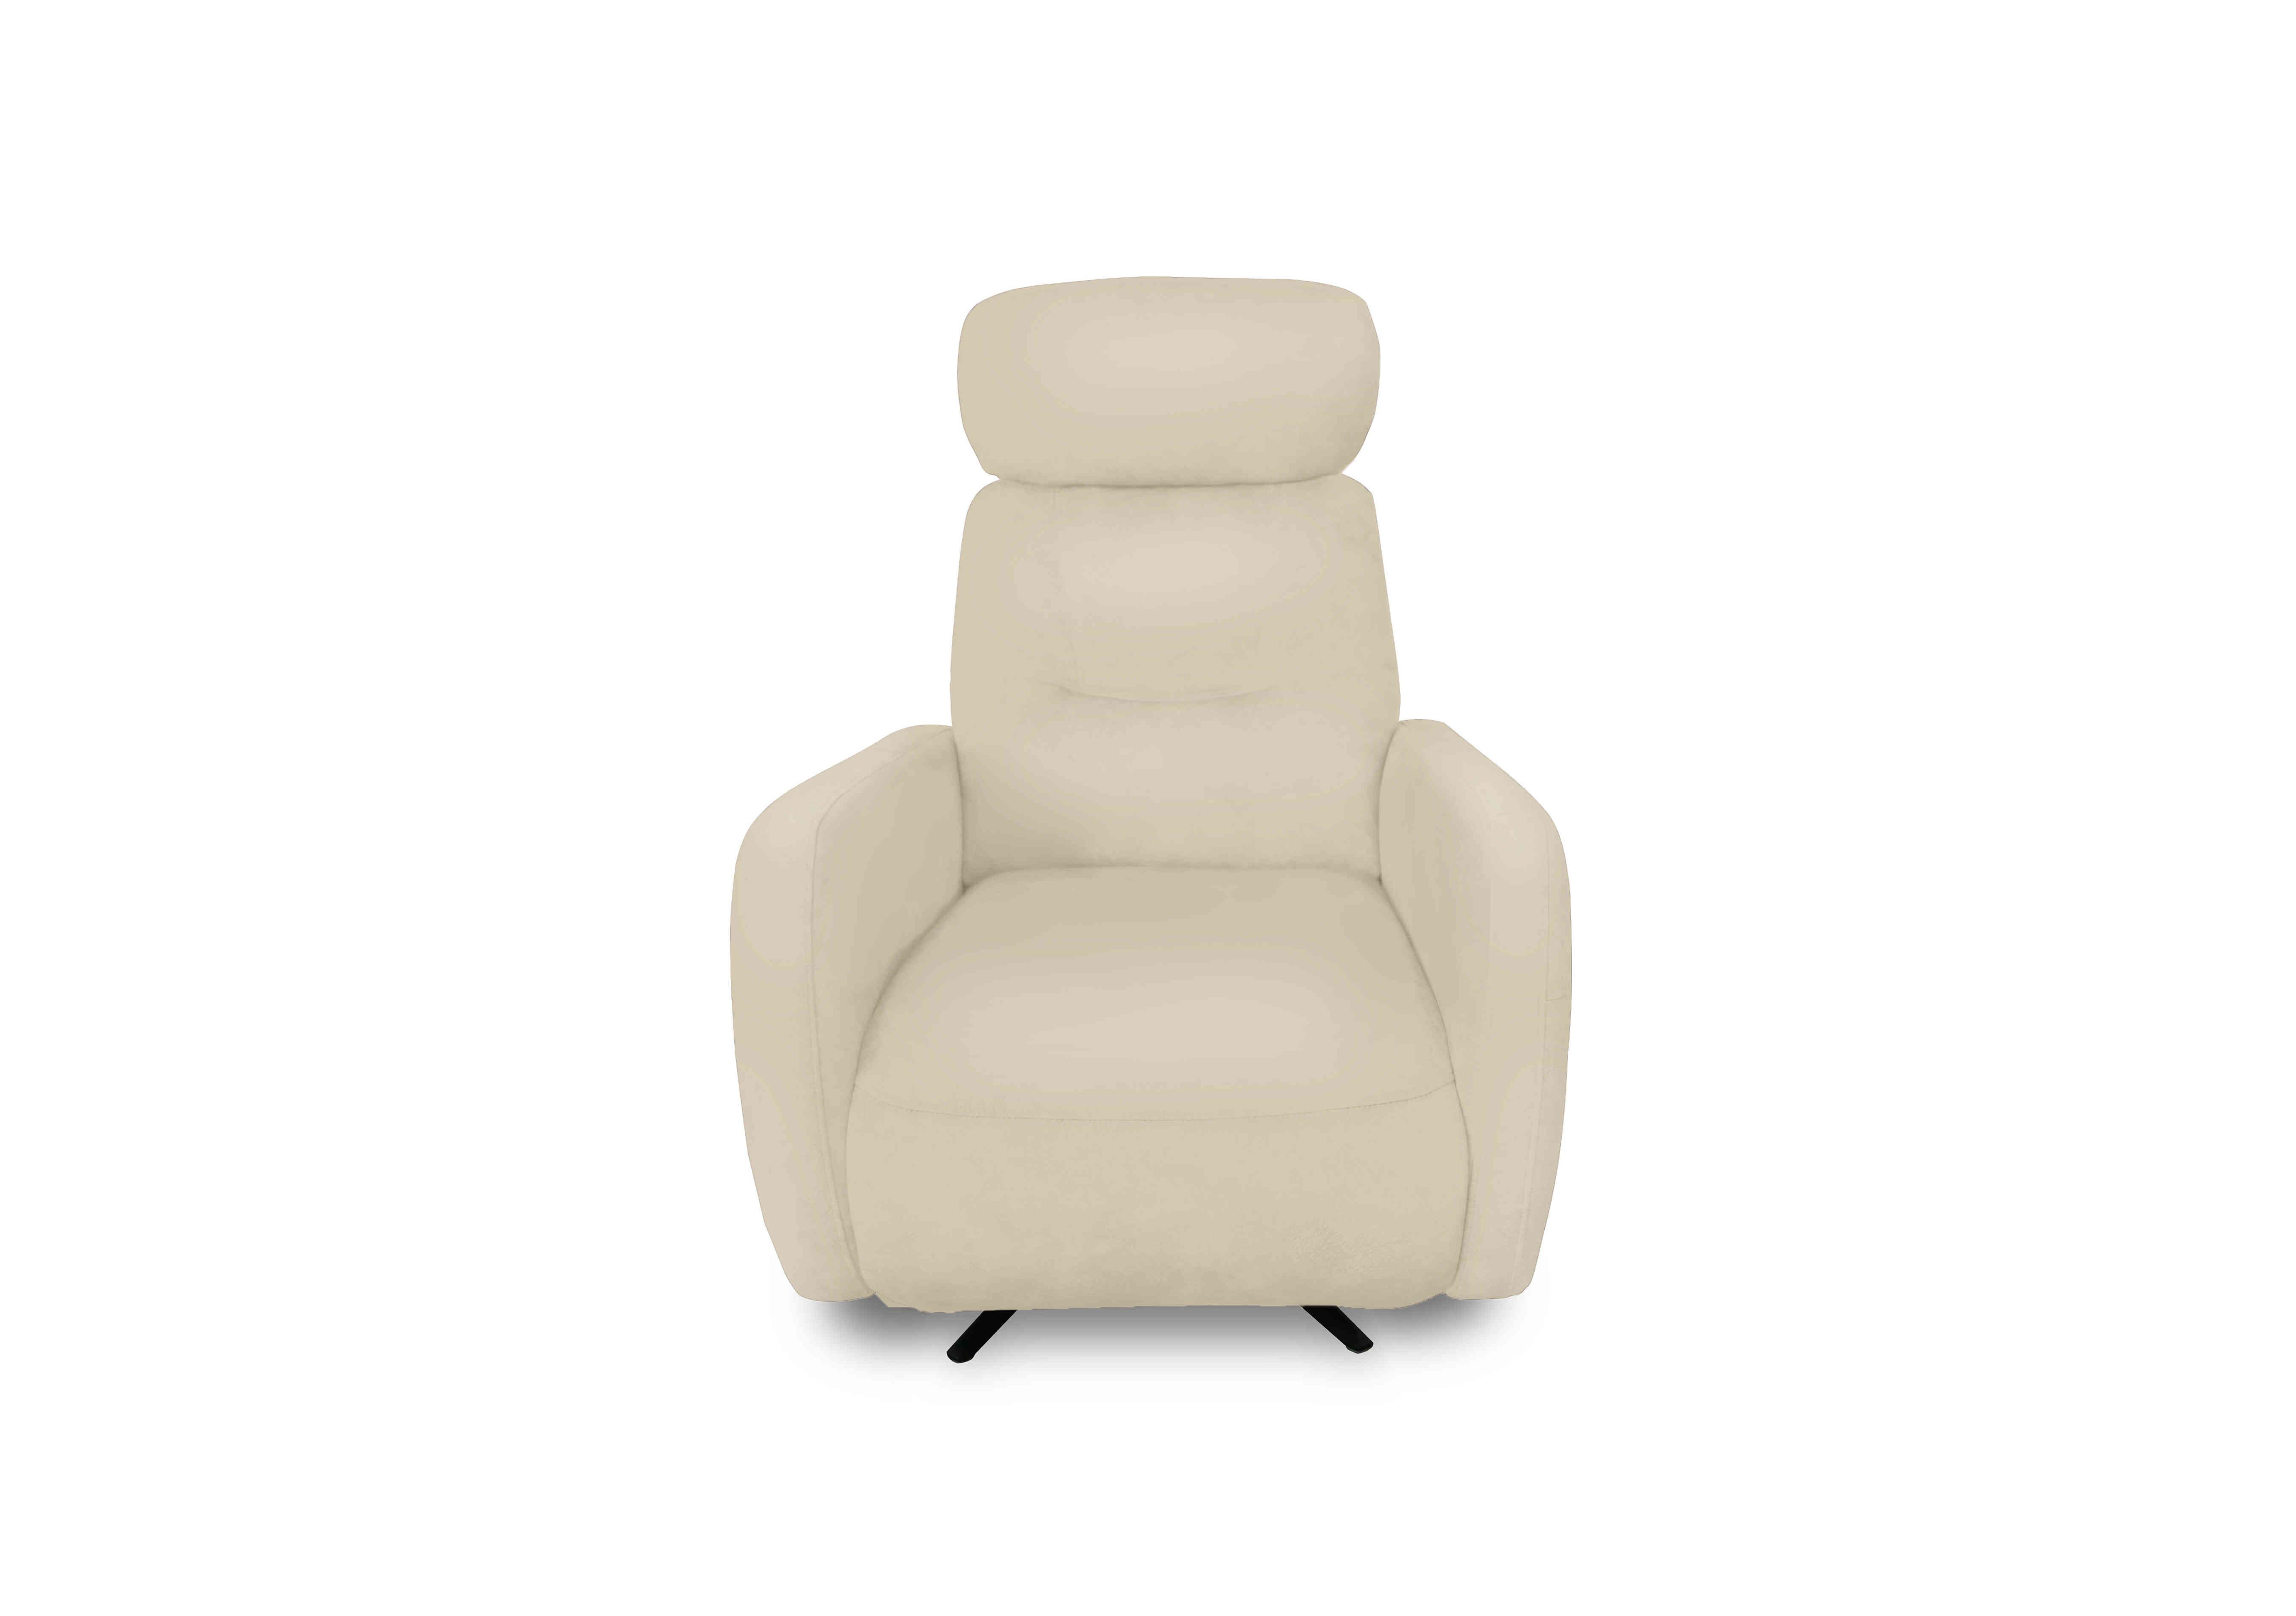 Designer Chair Collection Tokyo Leather Manual Recliner Swivel Chair in Bv-862c Bisque on Furniture Village